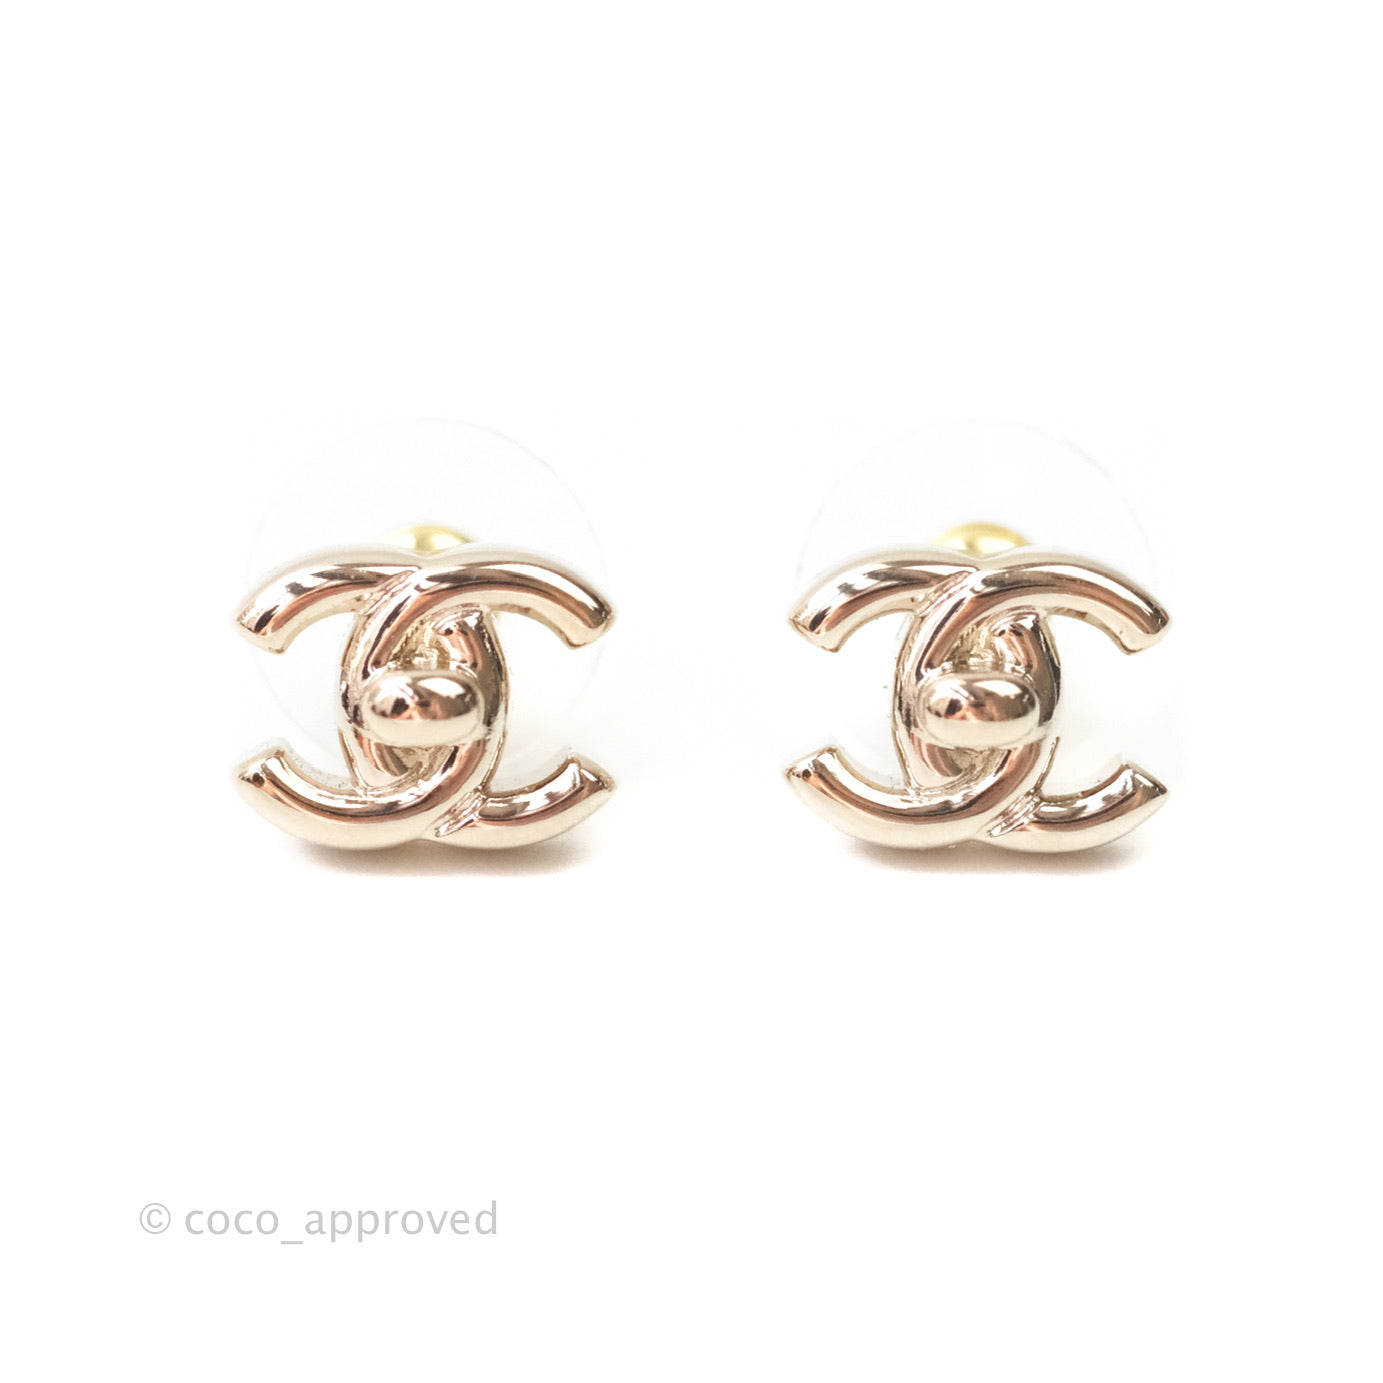 At Auction: Chanel, Chanel Gold-tone and Rhinestone 'CC' Earrings